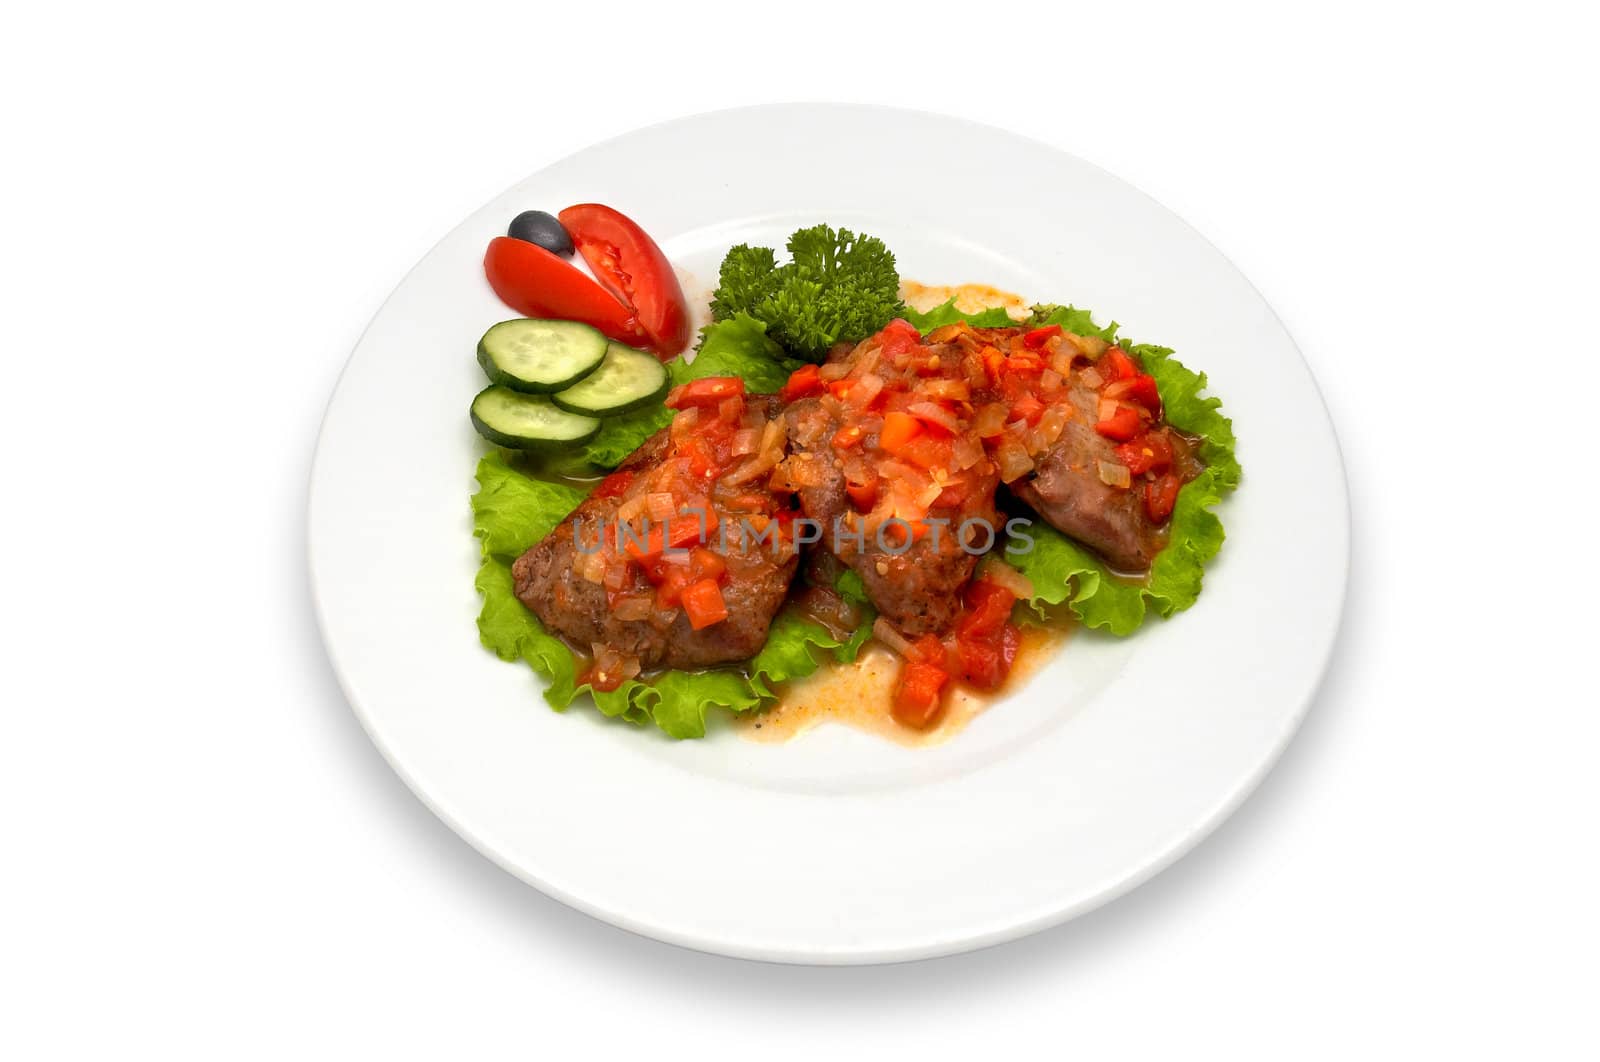 grilled veal fillet with vegetable salad sauce by starush